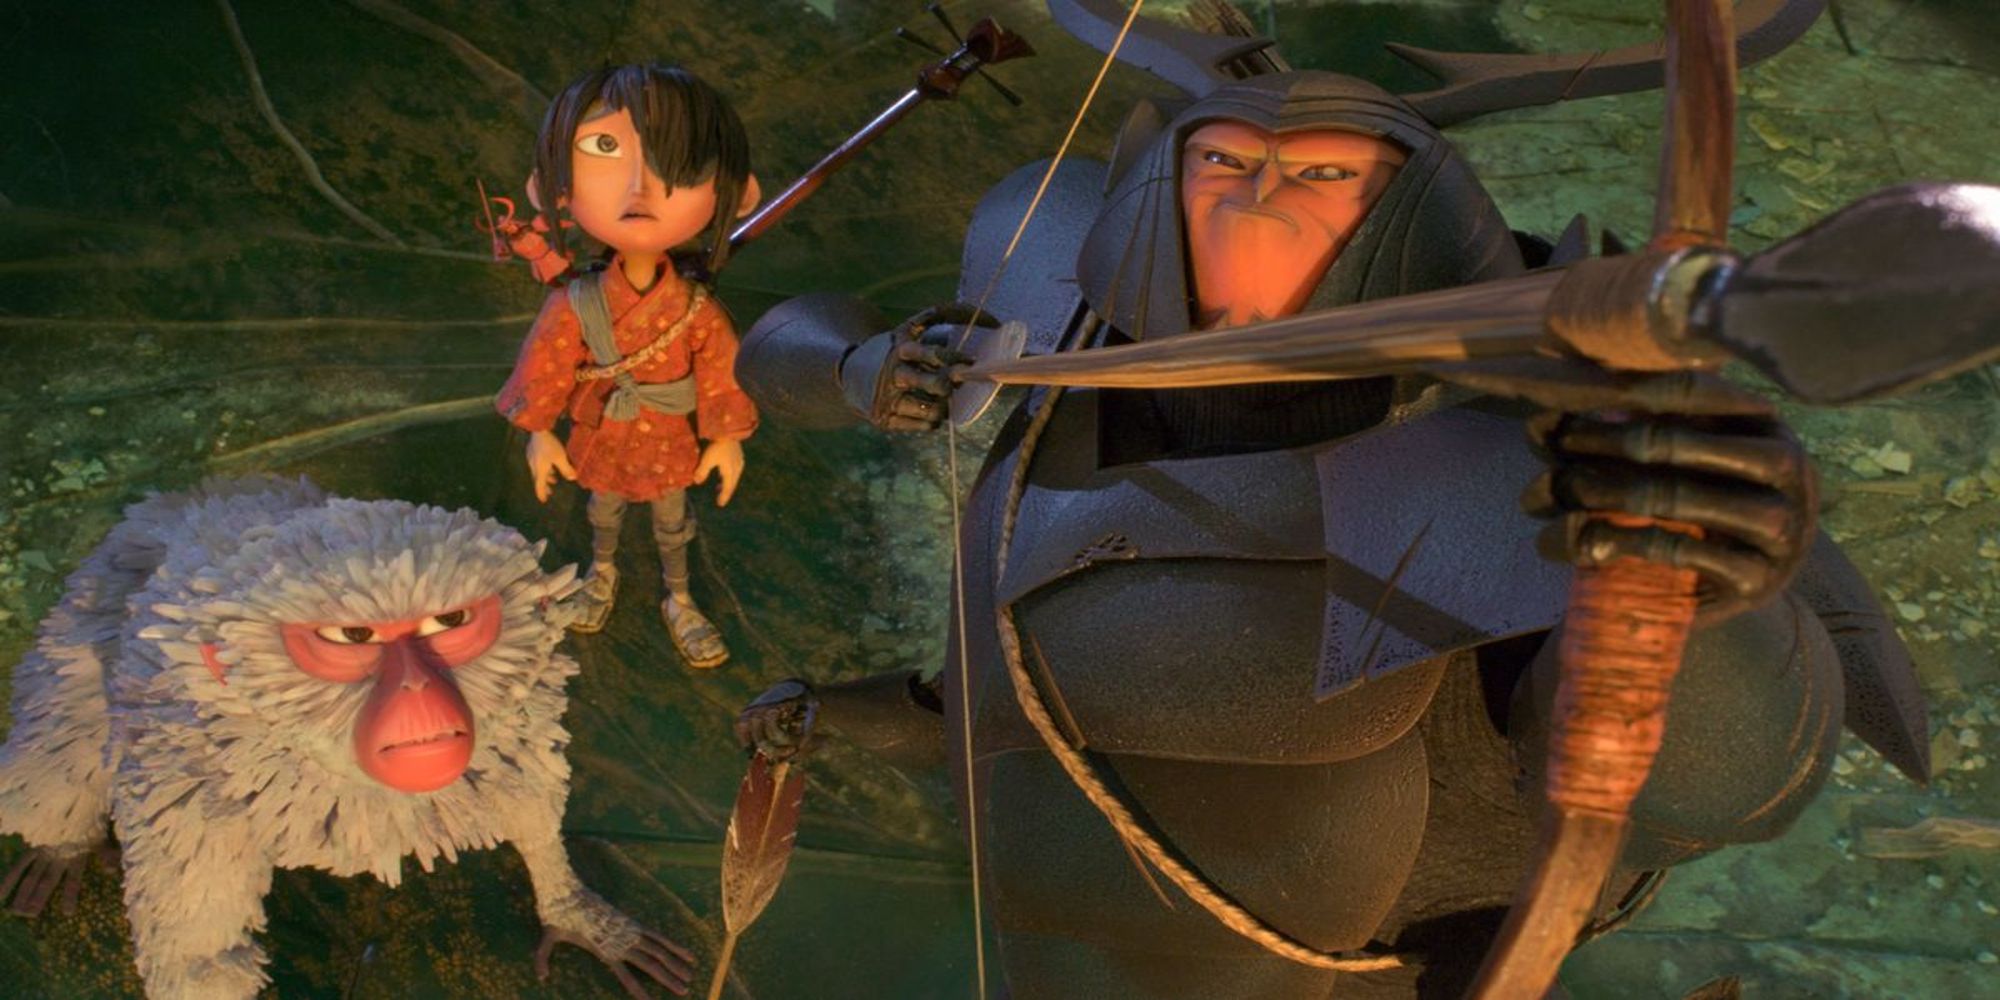 Kubo, Beetle, and Monkey in Kubo and the Two Strings